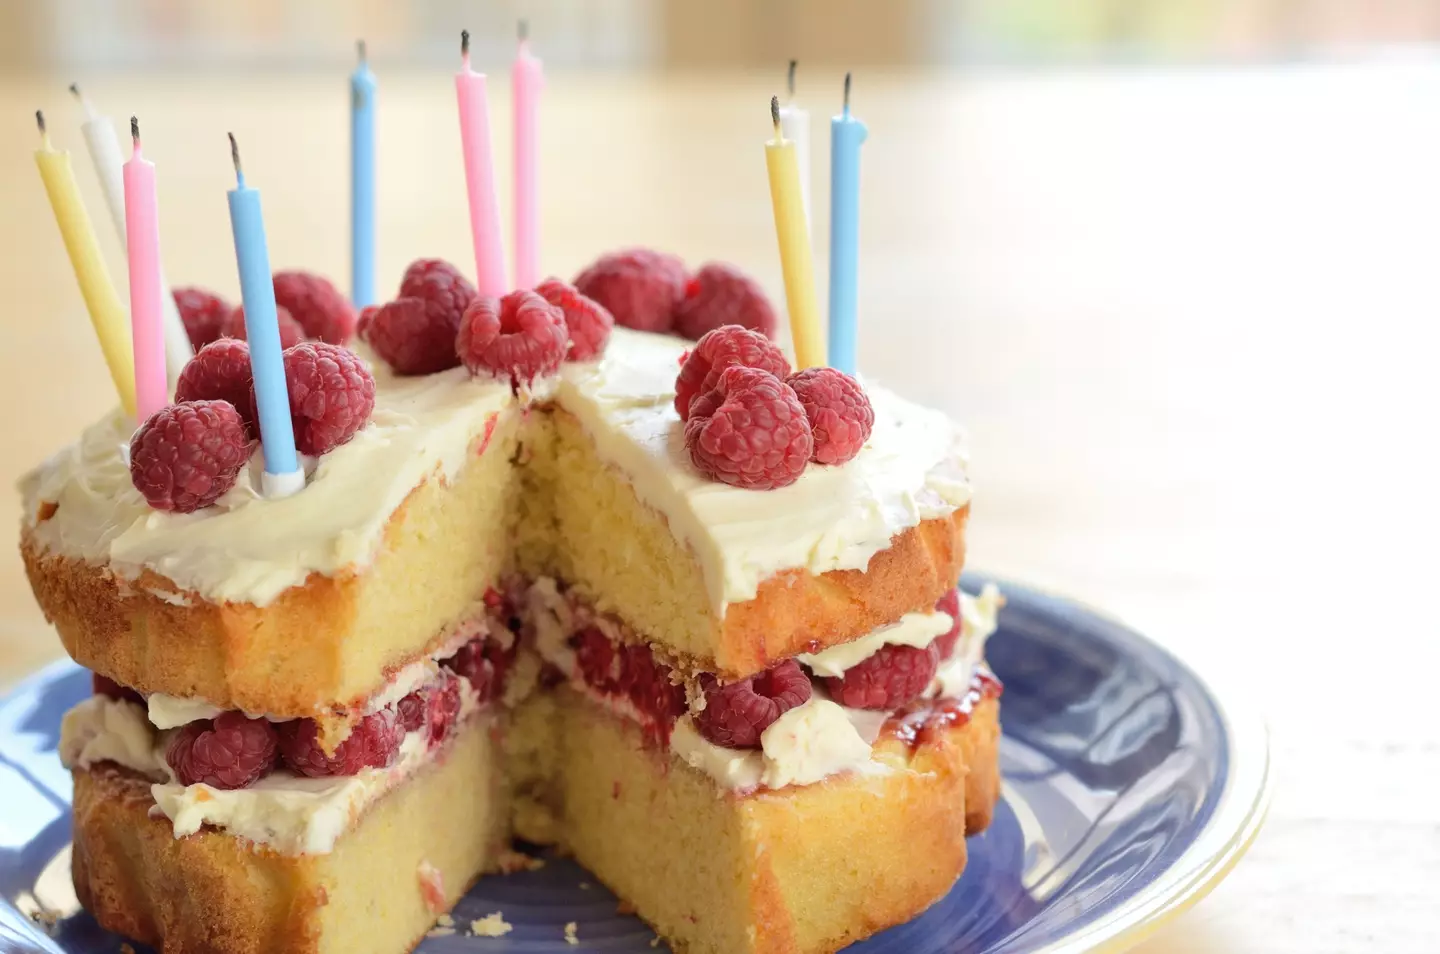 You might want to think twice before bringing a birthday cake to a restaurant.